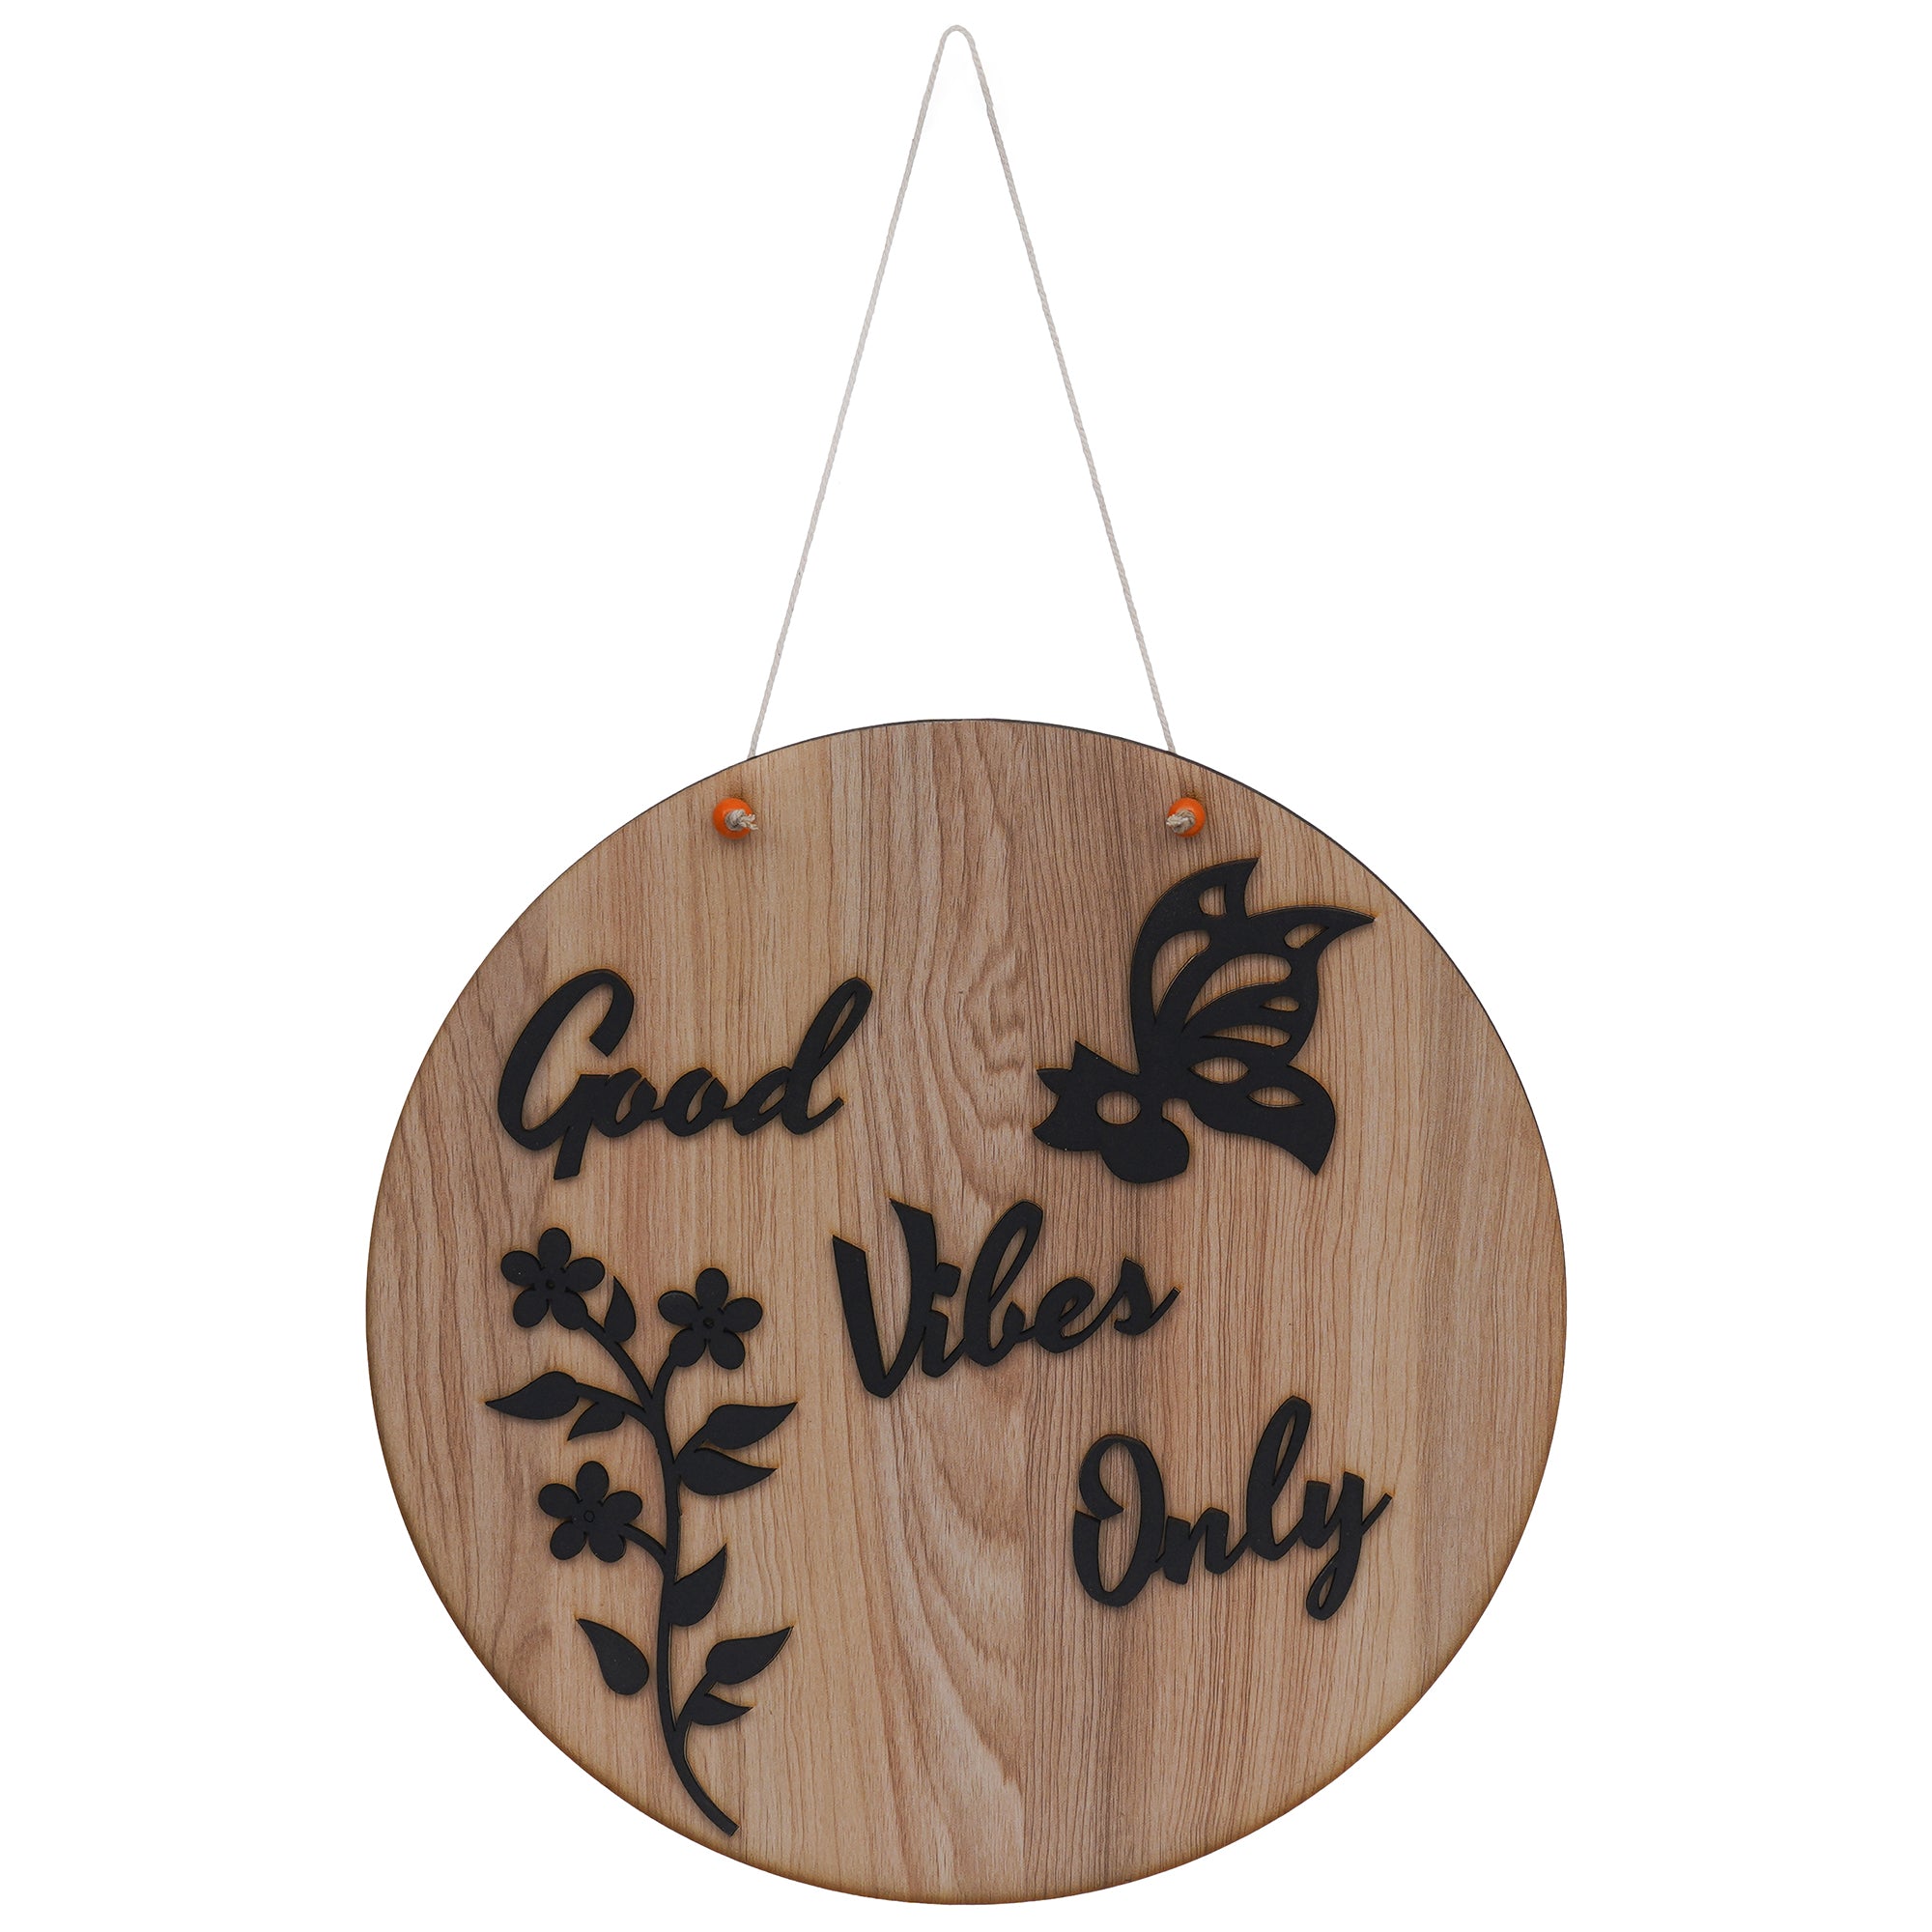 eCraftIndia Brown Wooden "Good Vibes Only" Butterfly & Floral Designer Wall Hanging Showpiece 2